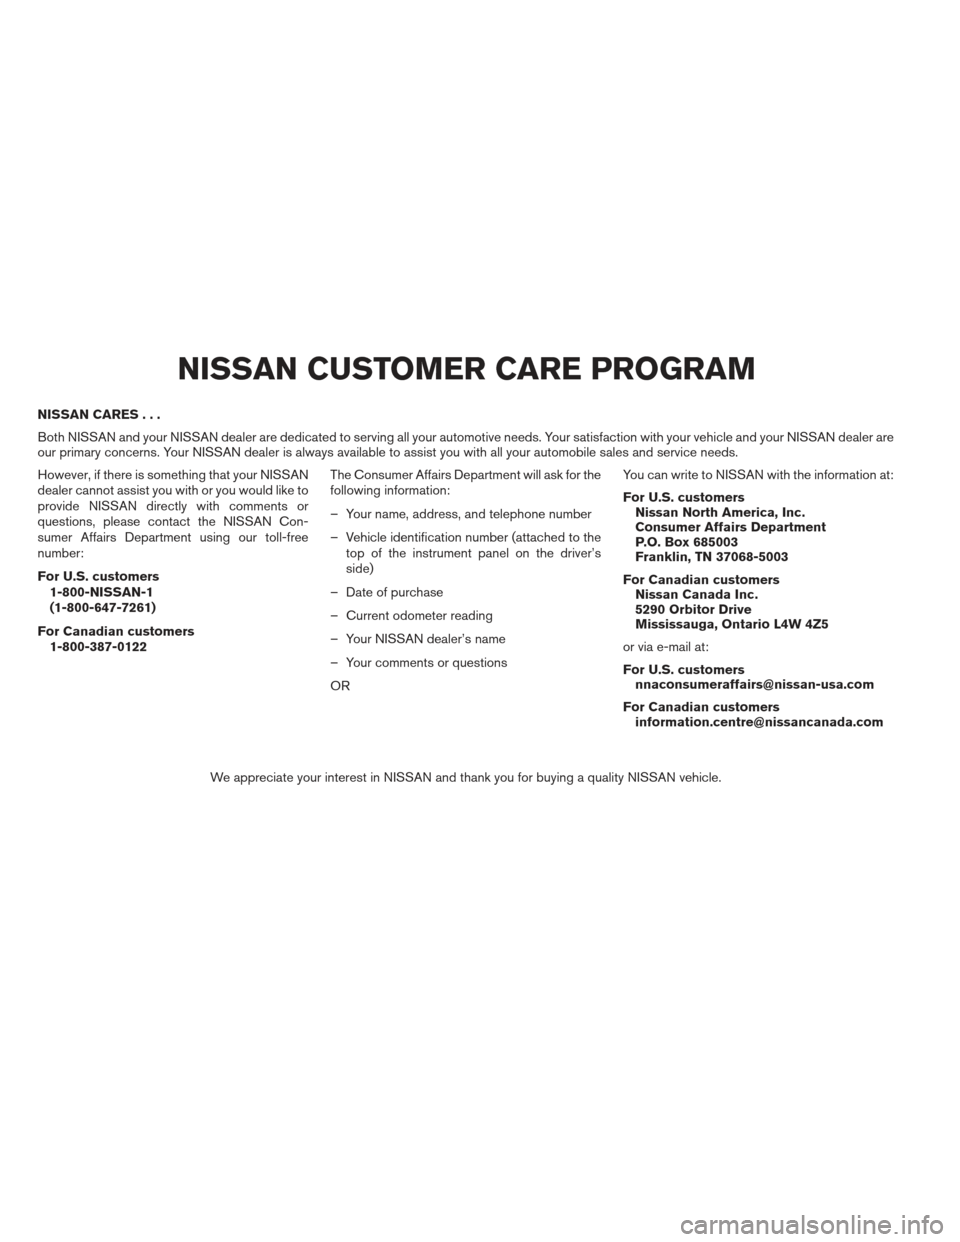 NISSAN MAXIMA 2012 A35 / 7.G Owners Manual NISSAN CARES...
Both NISSAN and your NISSAN dealer are dedicated to serving all your automotive needs. Your satisfaction with your vehicle and your NISSAN dealer are
our primary concerns. Your NISSAN 